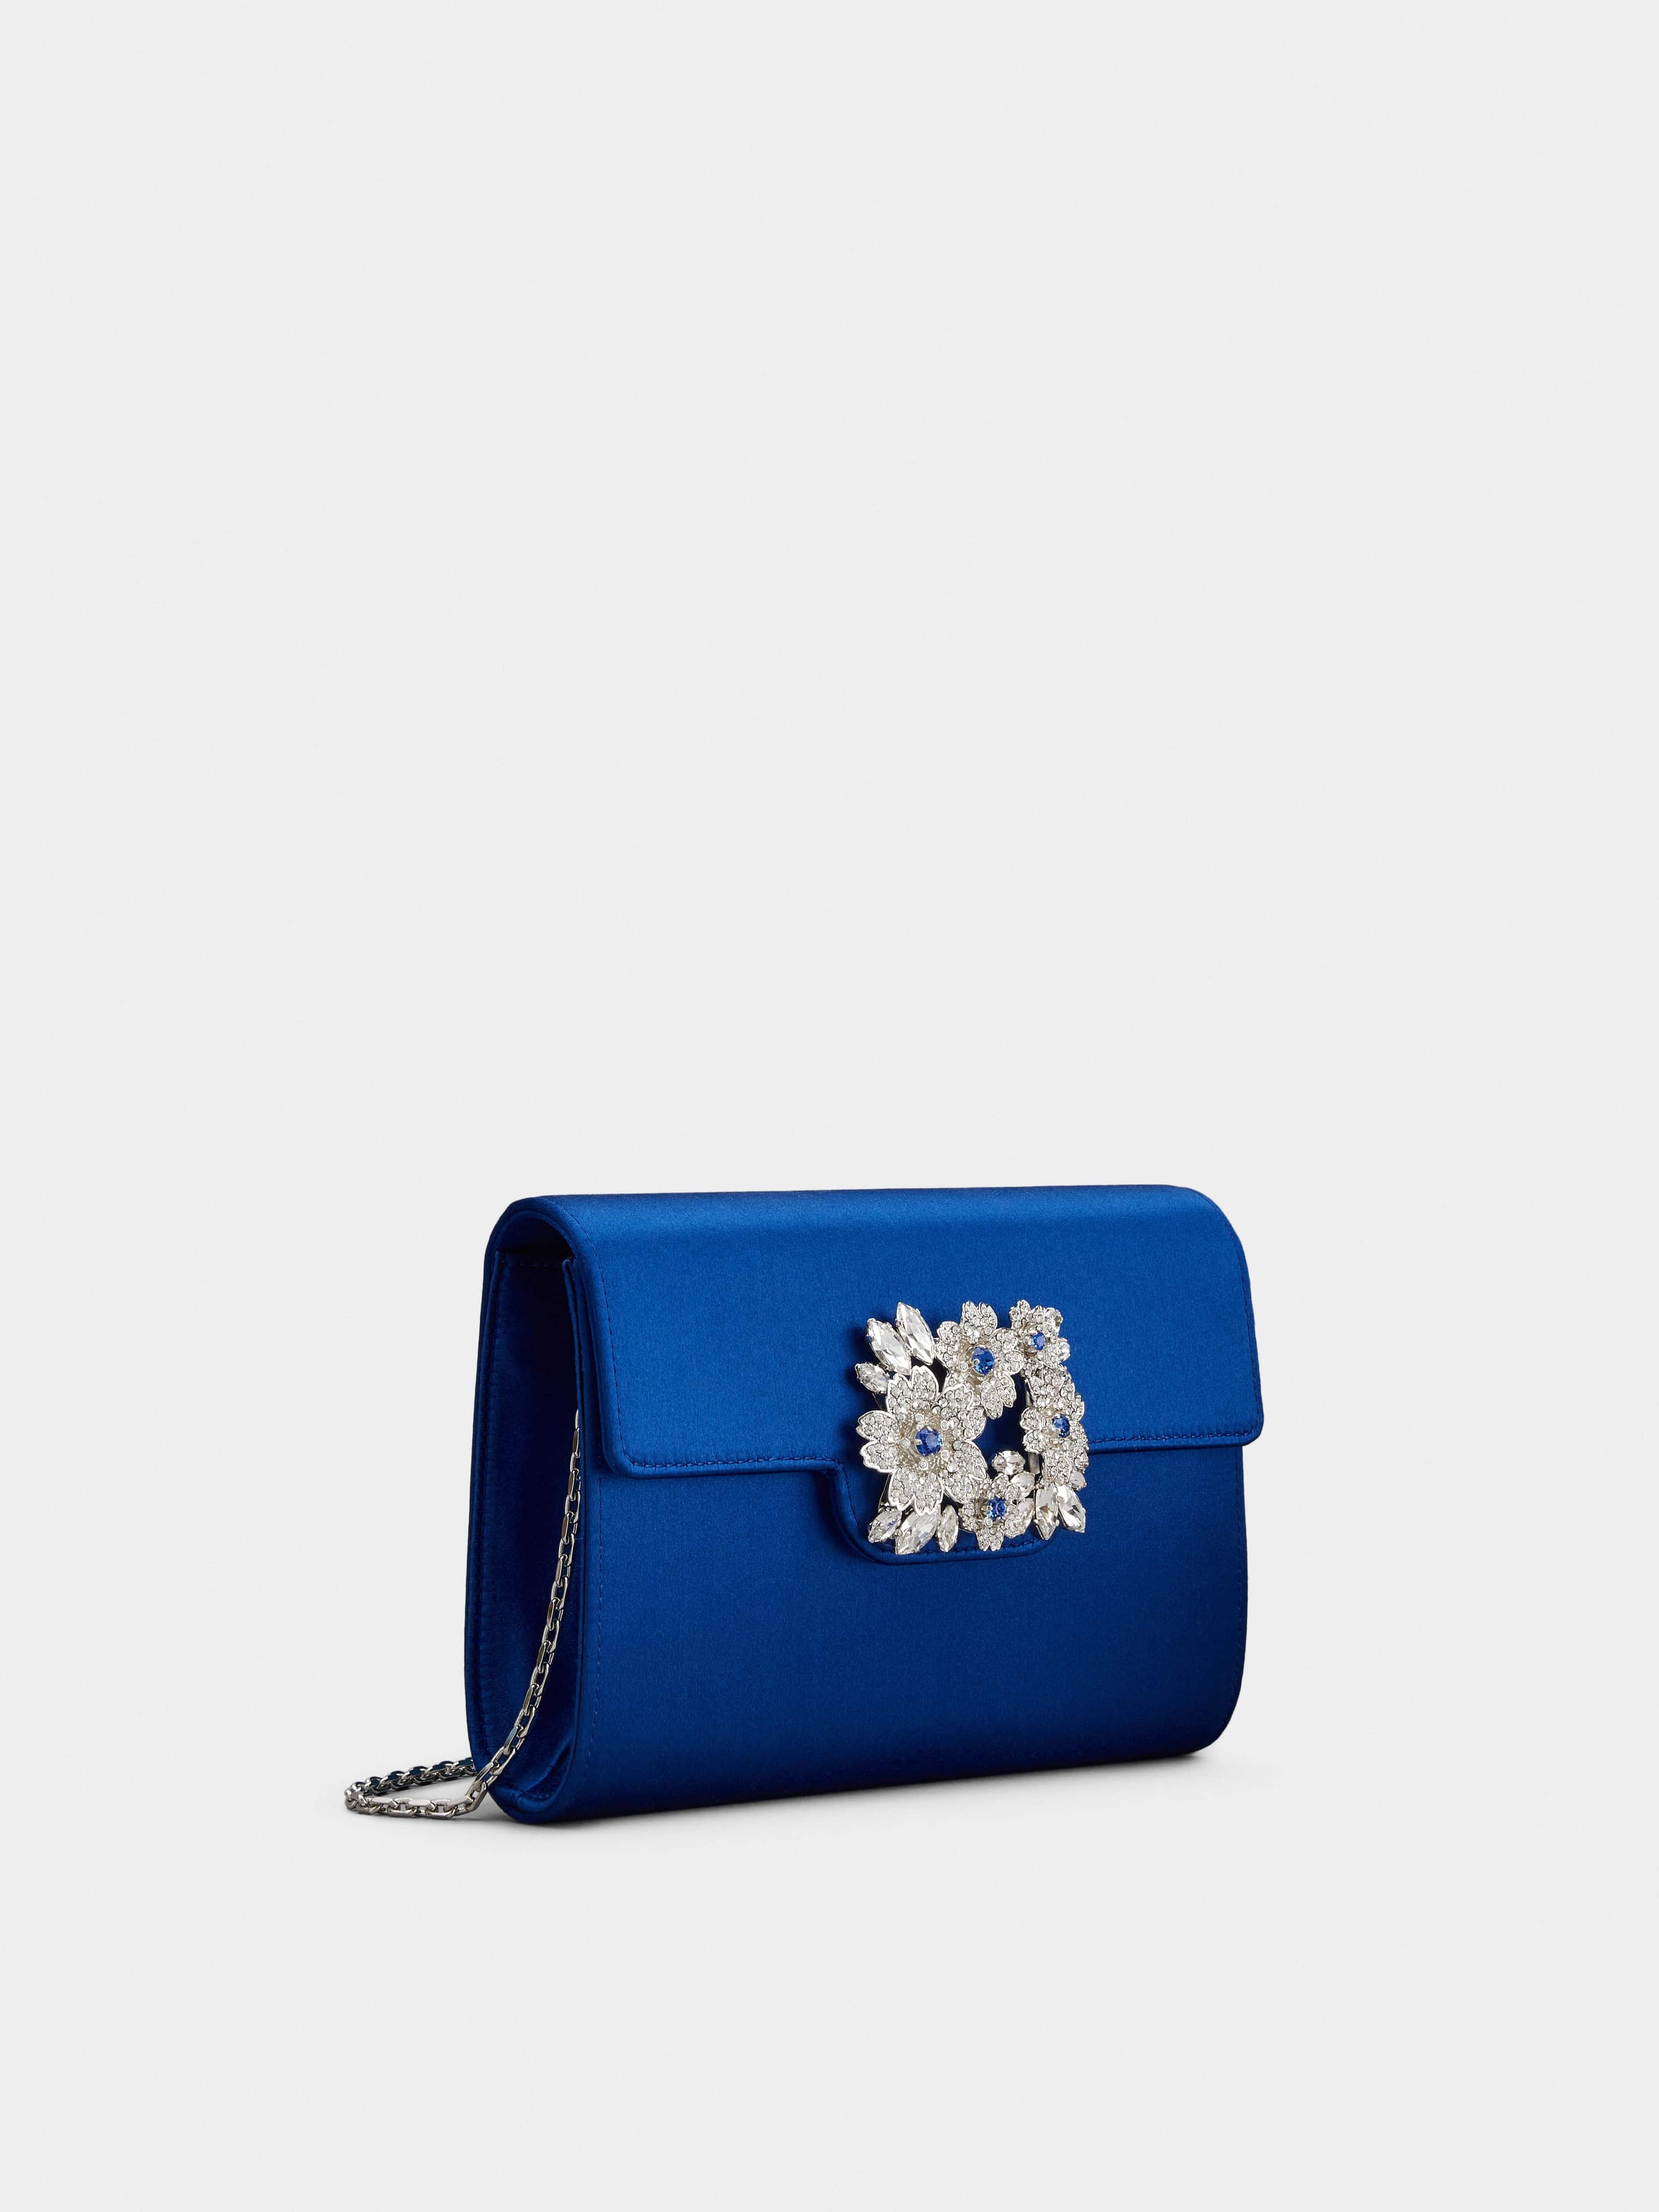 RV Bouquet Strass Colored Buckle Clutch in Satin - 3